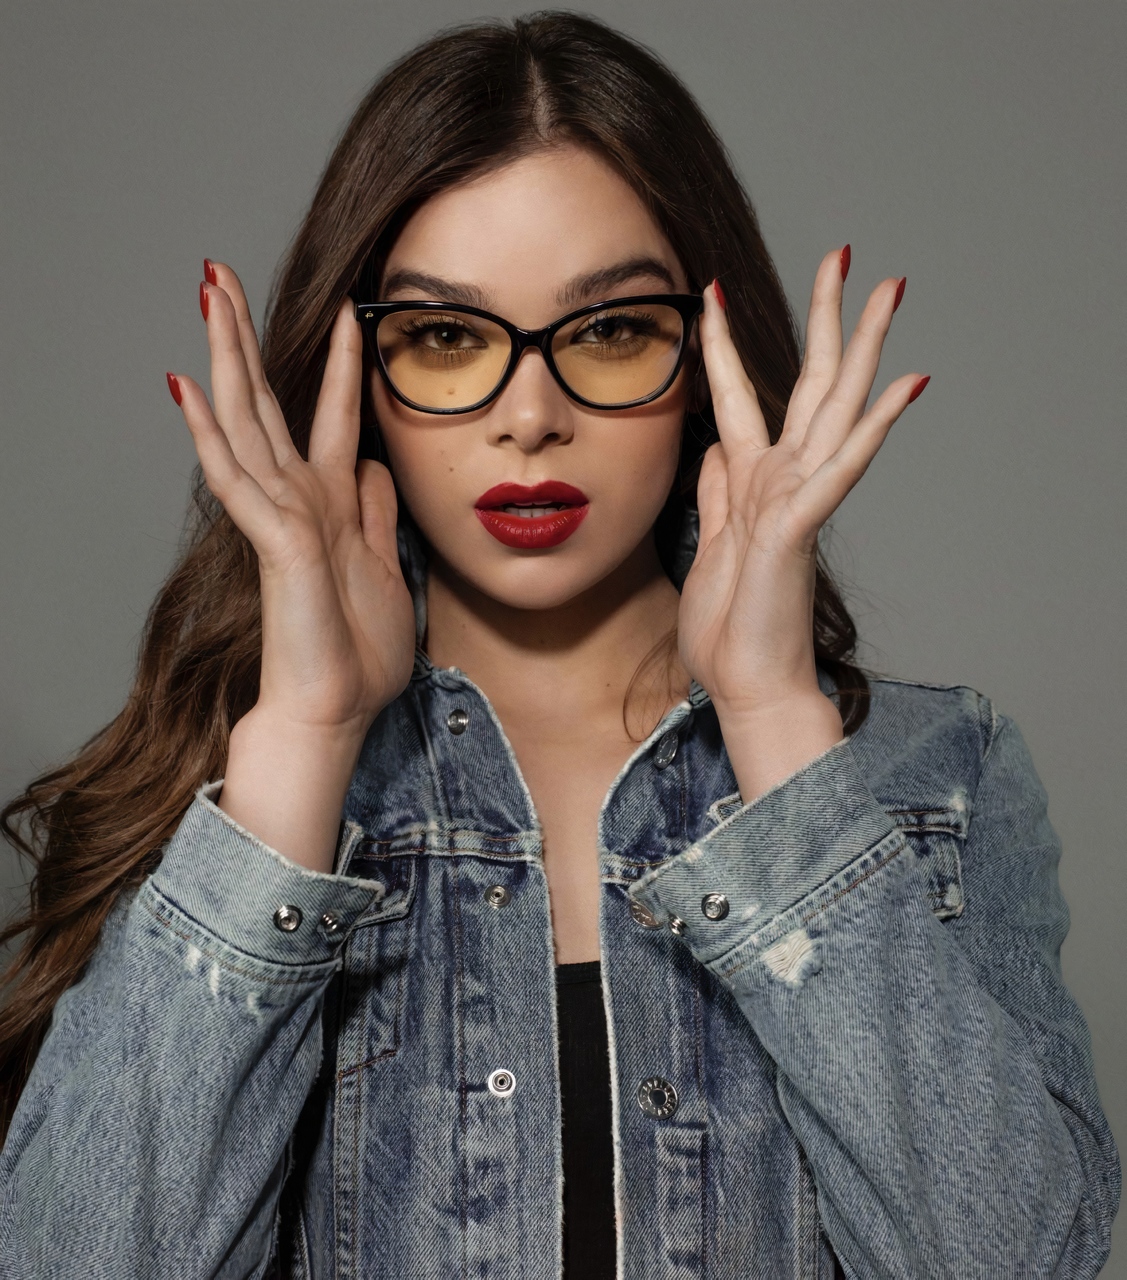 People 1127x1280 Hailee Steinfeld women face actress singer lipstick denim jacket indoors simple background red lipstick women with glasses